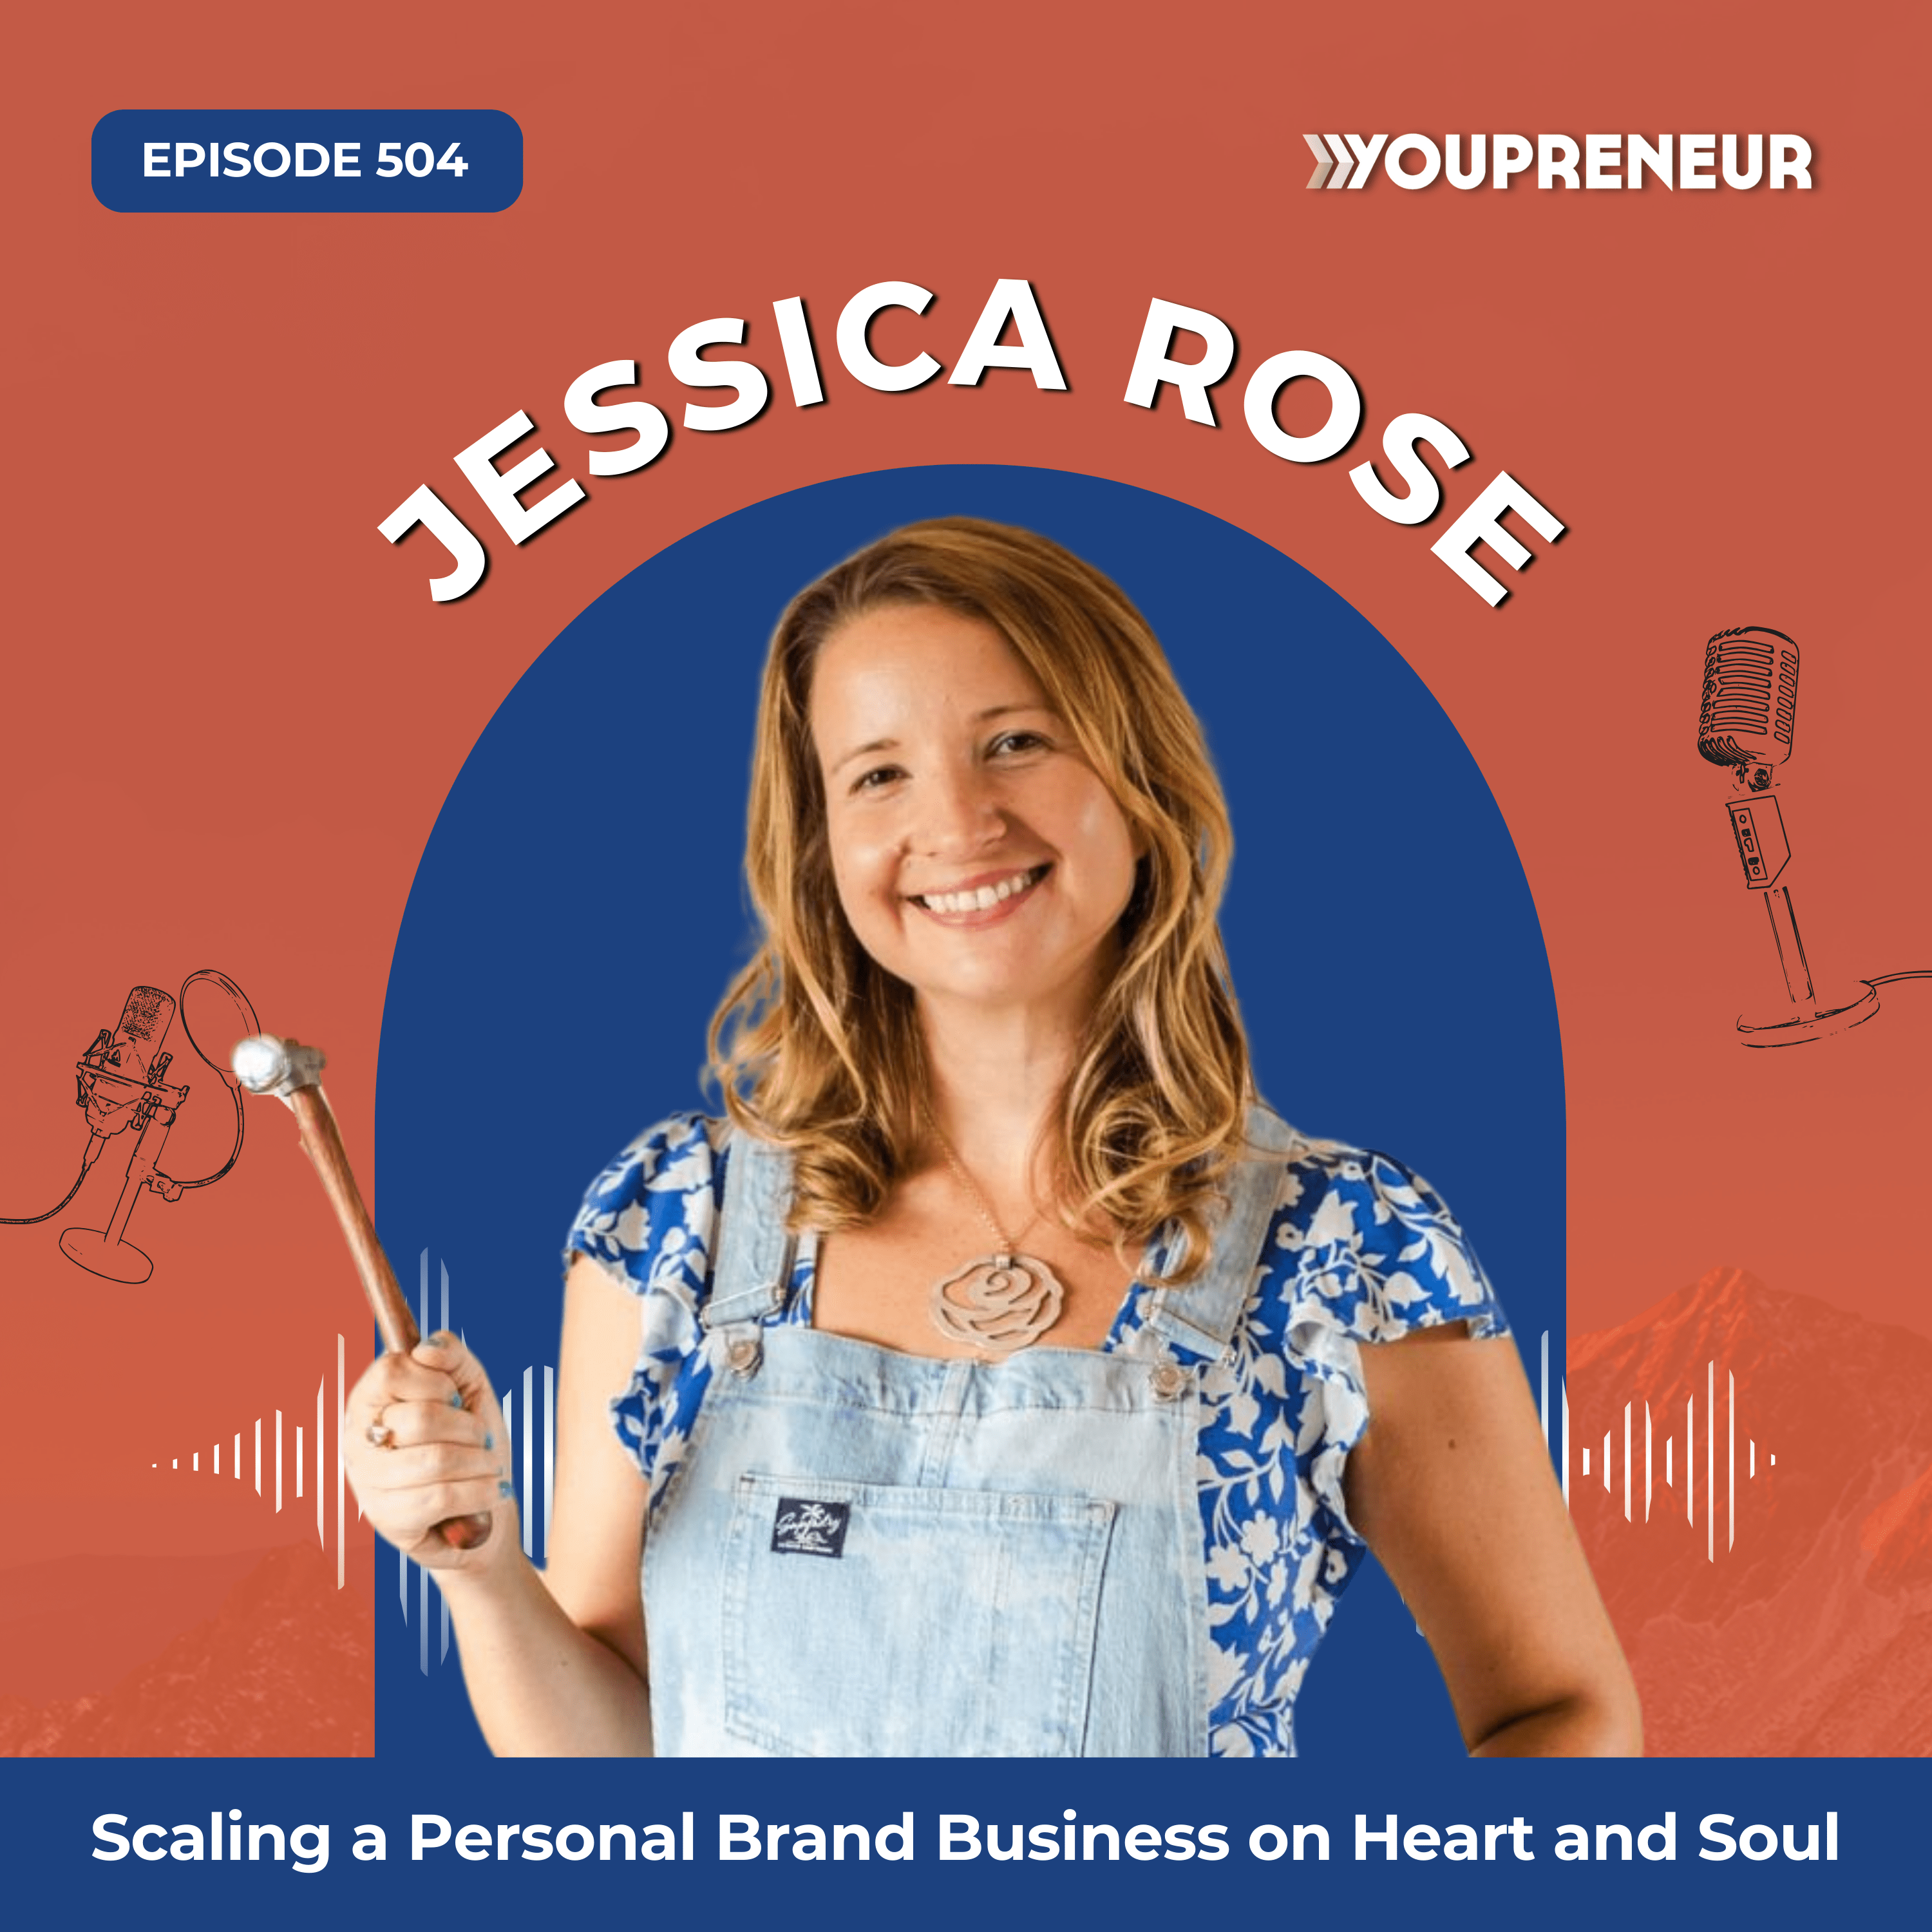 Scaling a Personal Brand Business on Heart and Soul with Jessica Rose